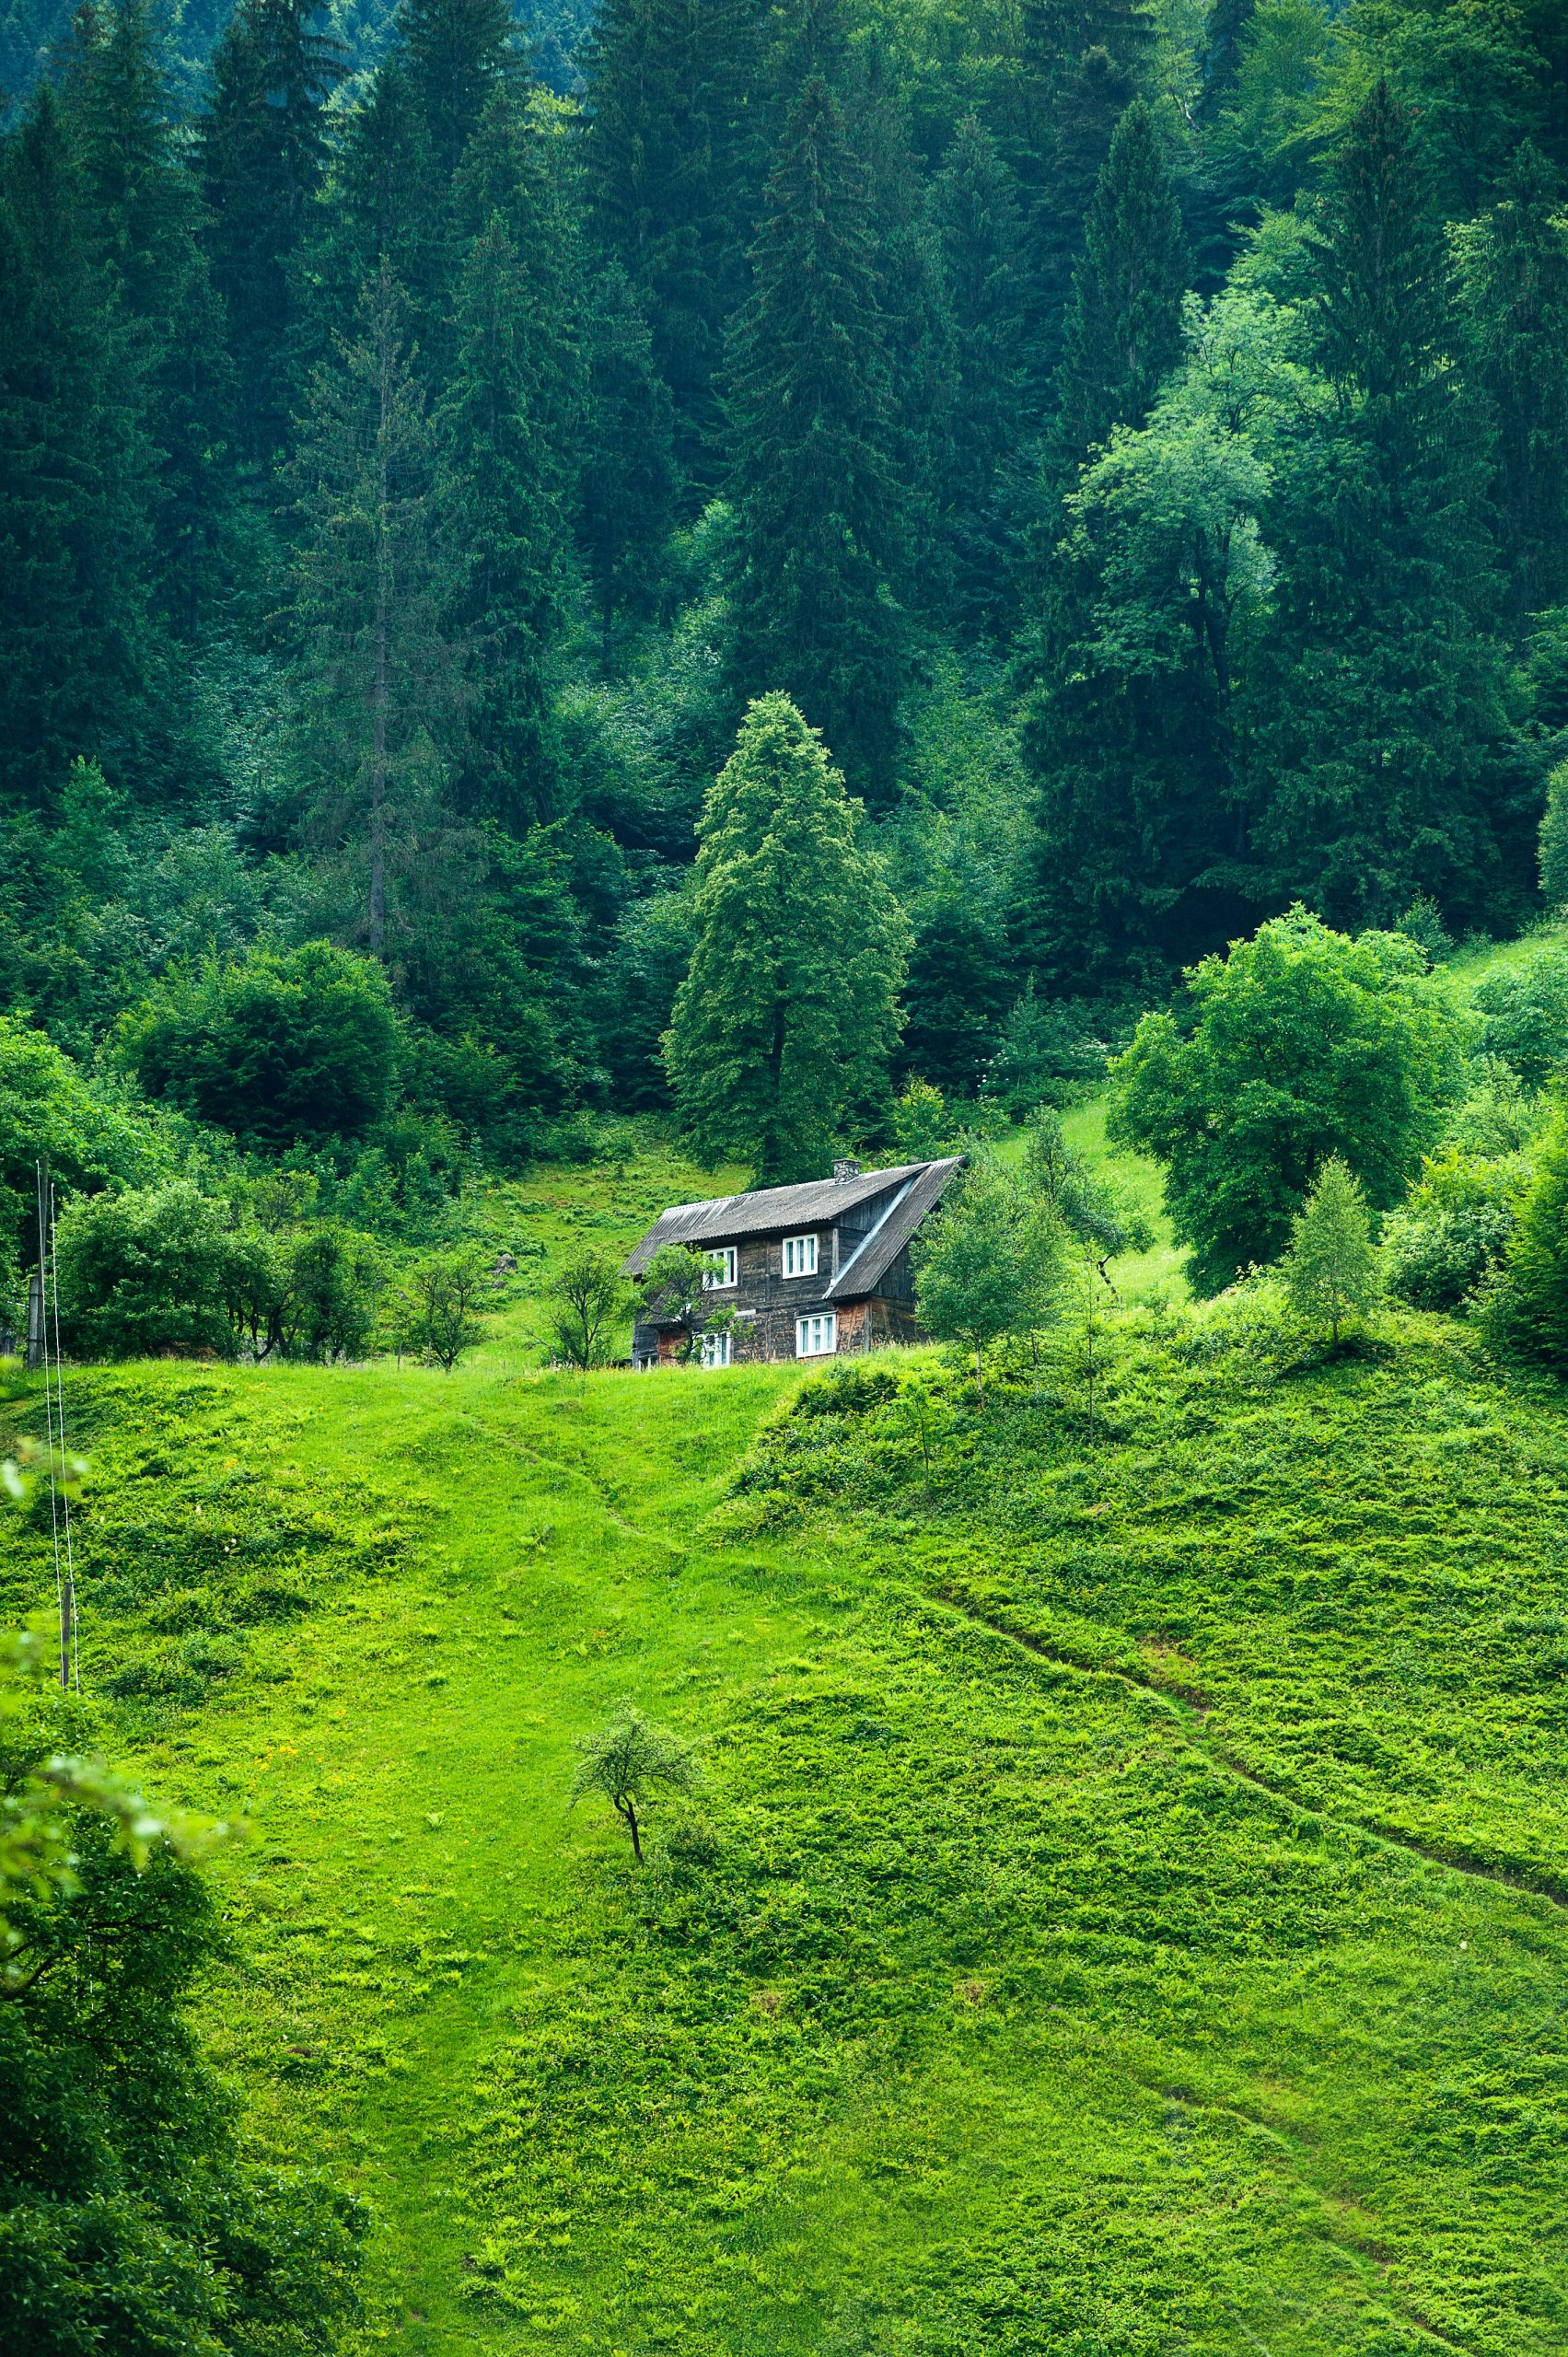 A quaint house on a green hill in a very green forest